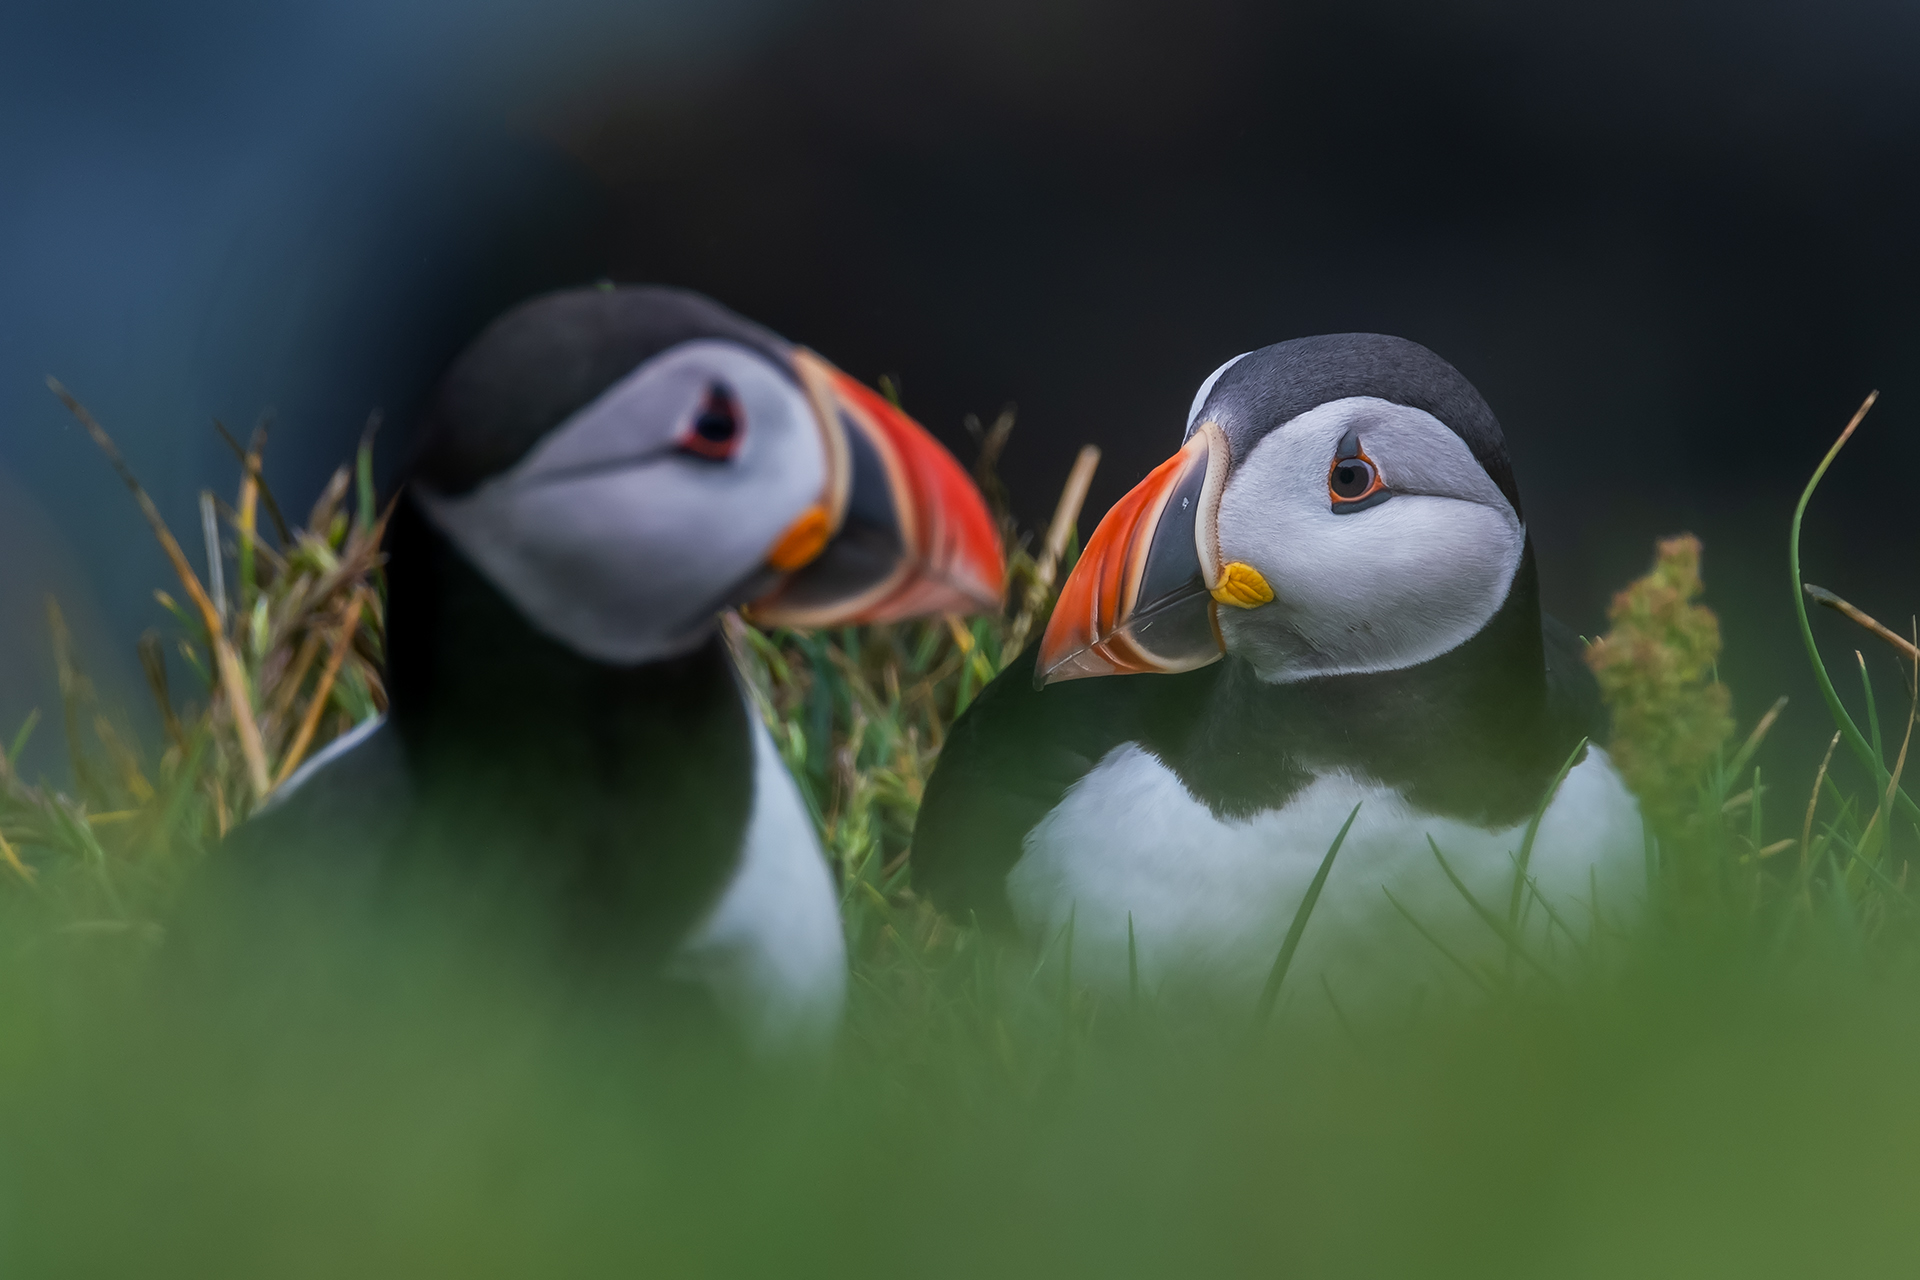 10 Facts About Puffins